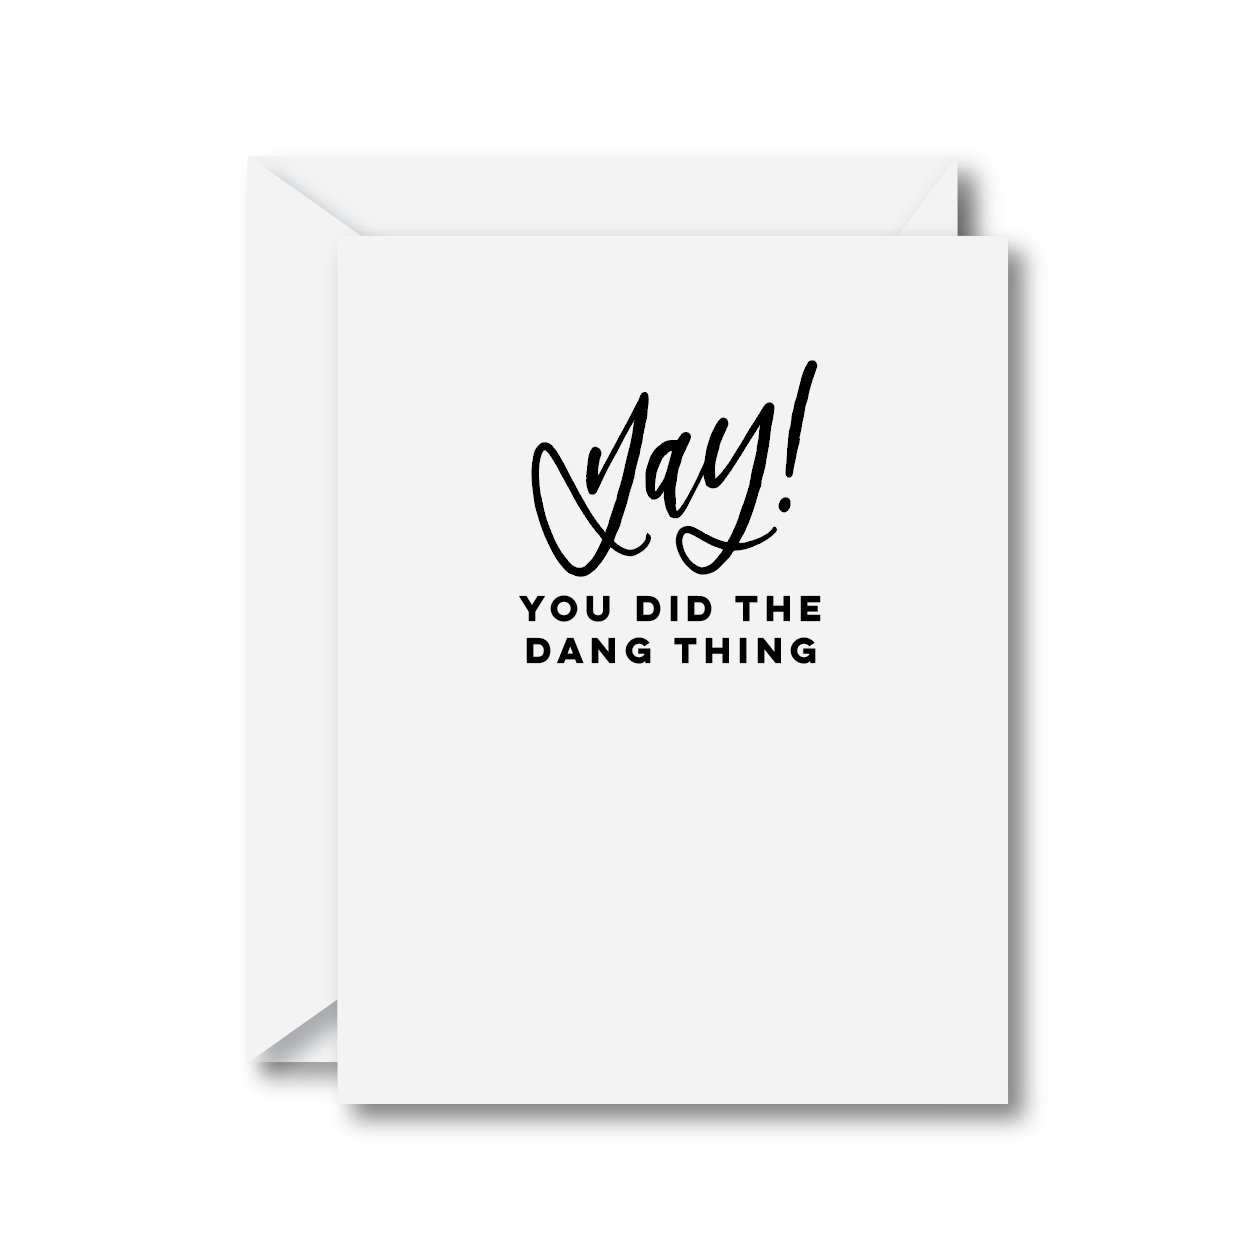 Yay! You Did the Dang Thing Card